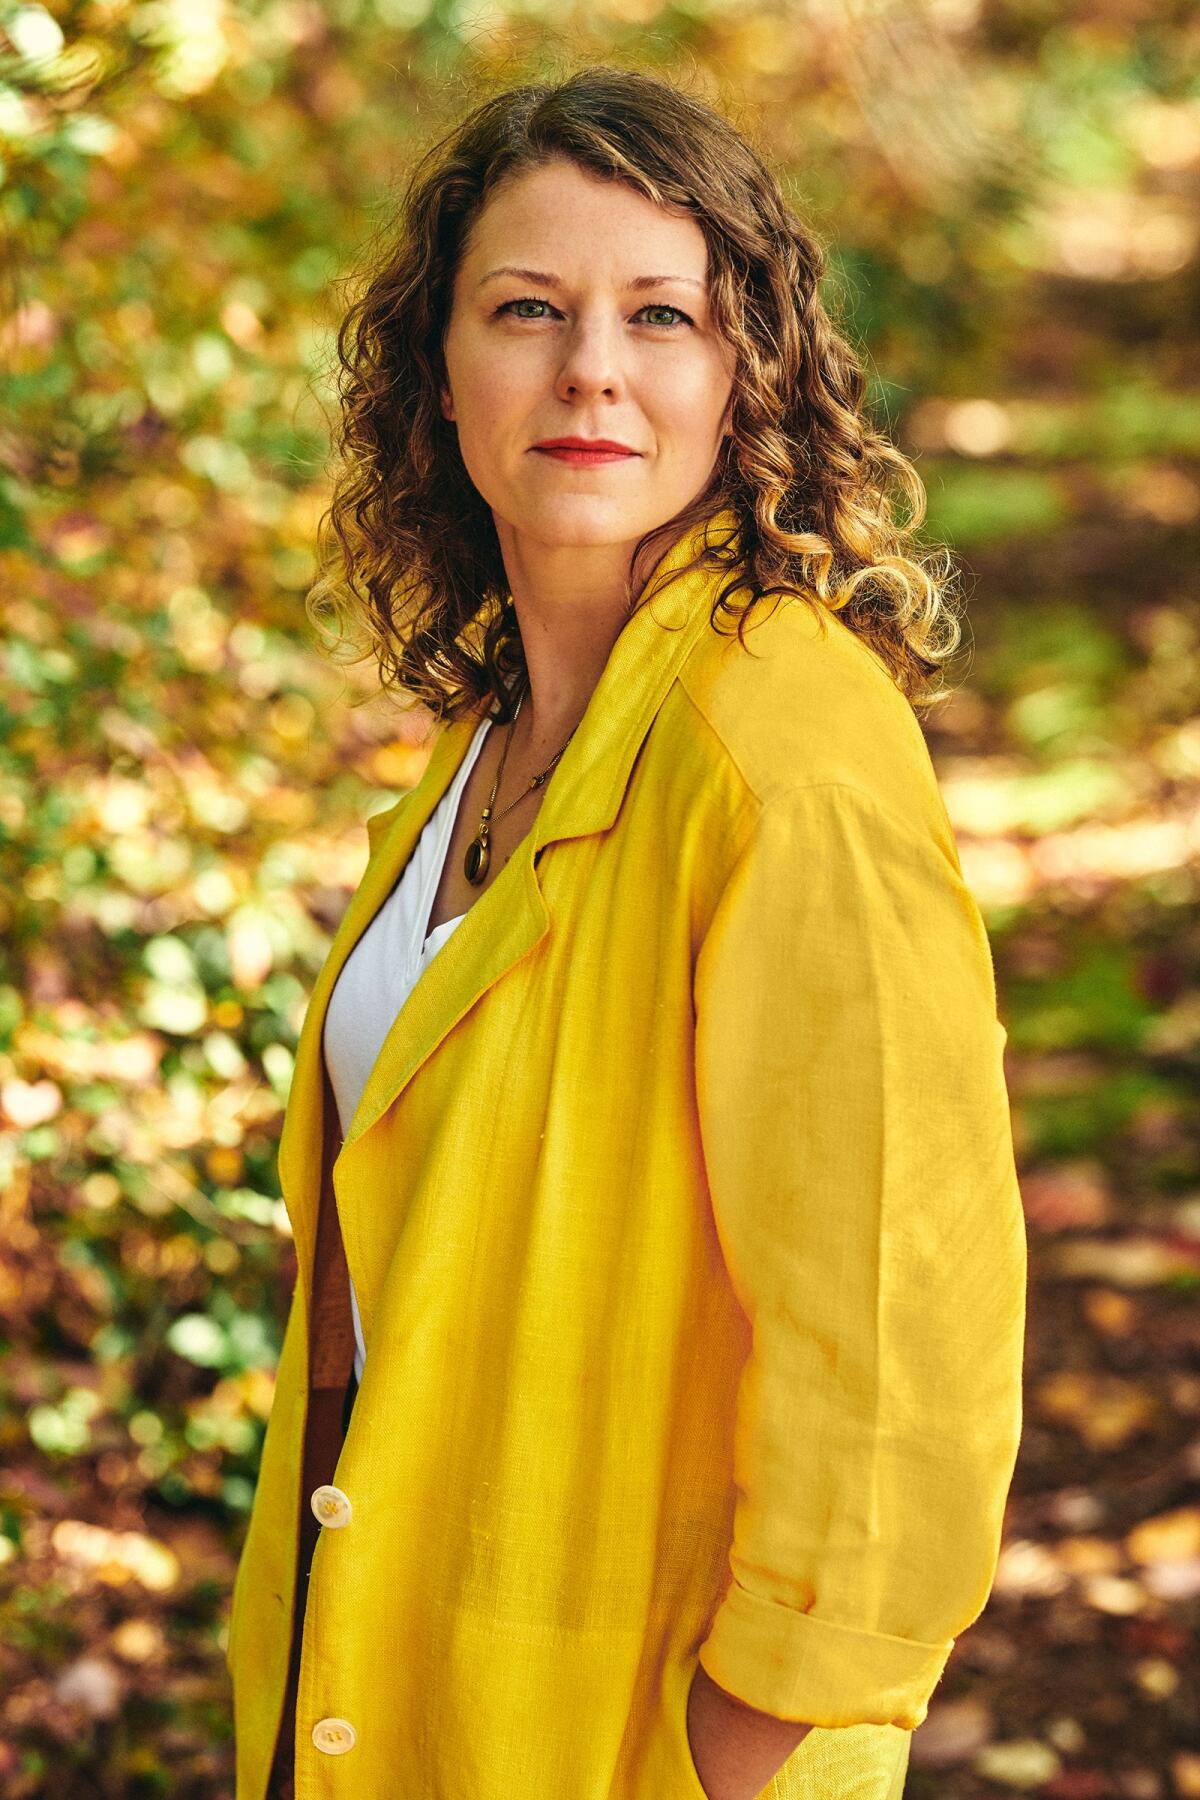 A woman in a yellow jacket stands in front of greenery.